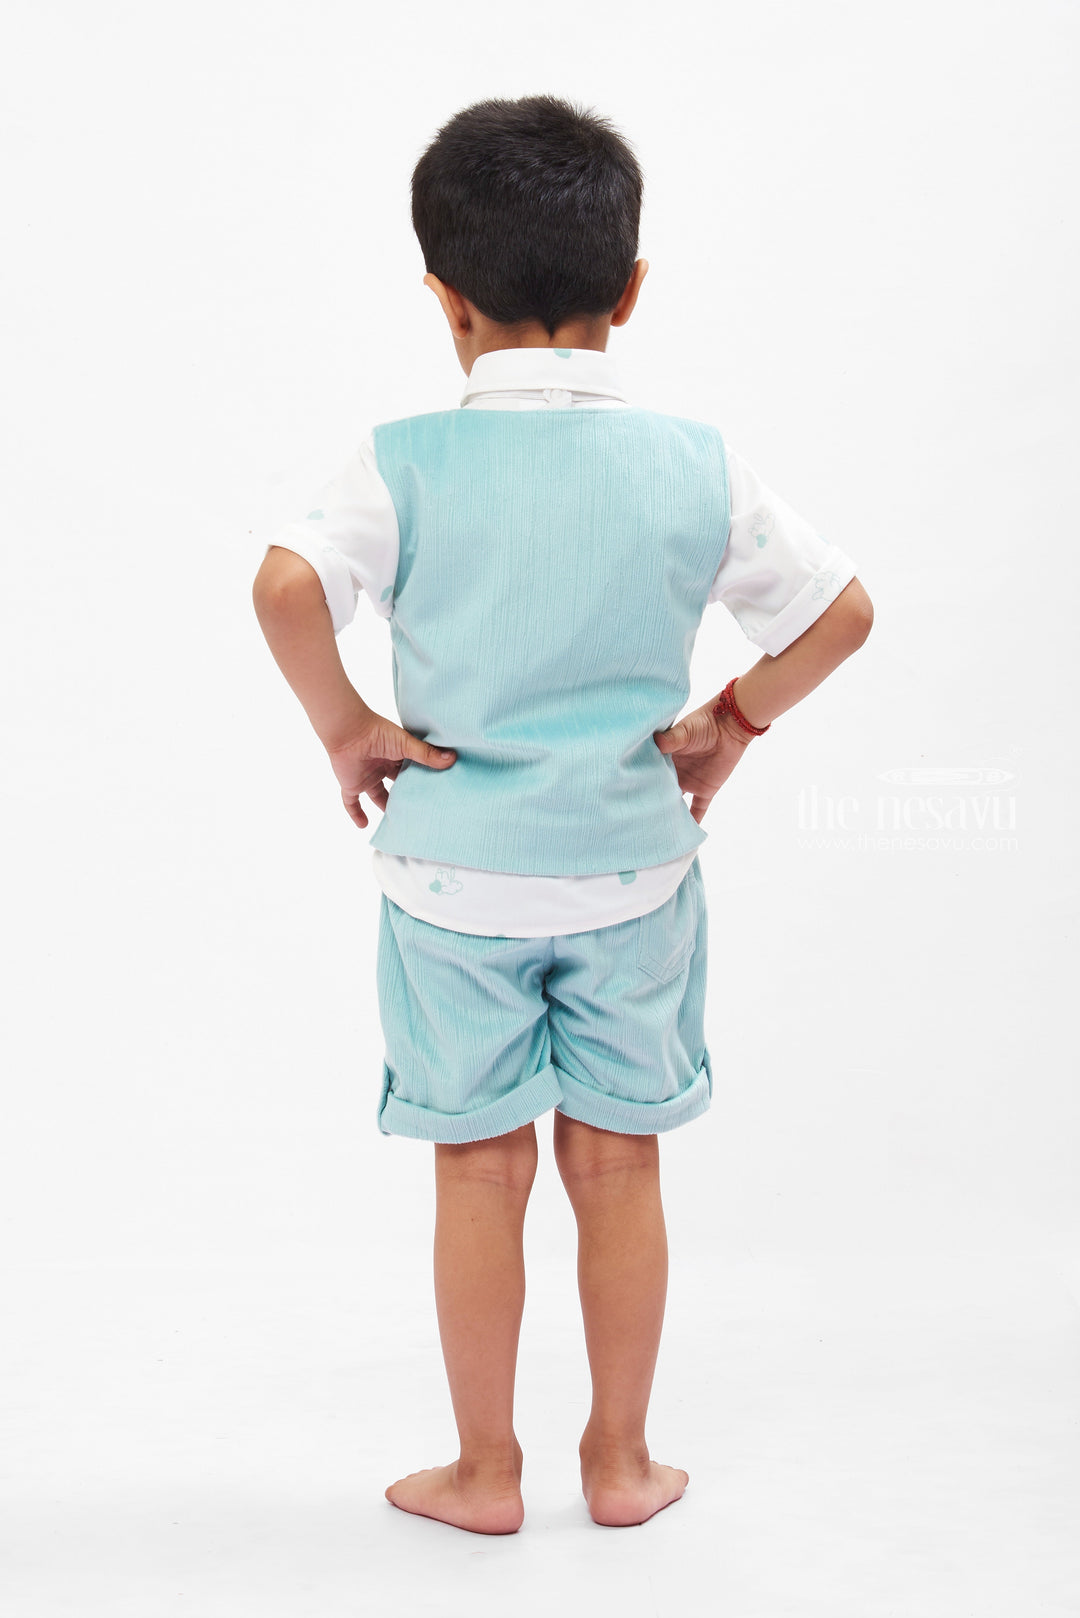 The Nesavu Boys Casual Set Boys Mint Green Vest & Shorts Set with Embroidered Shirt - Toddler's Dressy Casual Nesavu Mint Green Boys Vest and Shorts Set | Embroidered Dressy Casual Outfit | The Nesavu